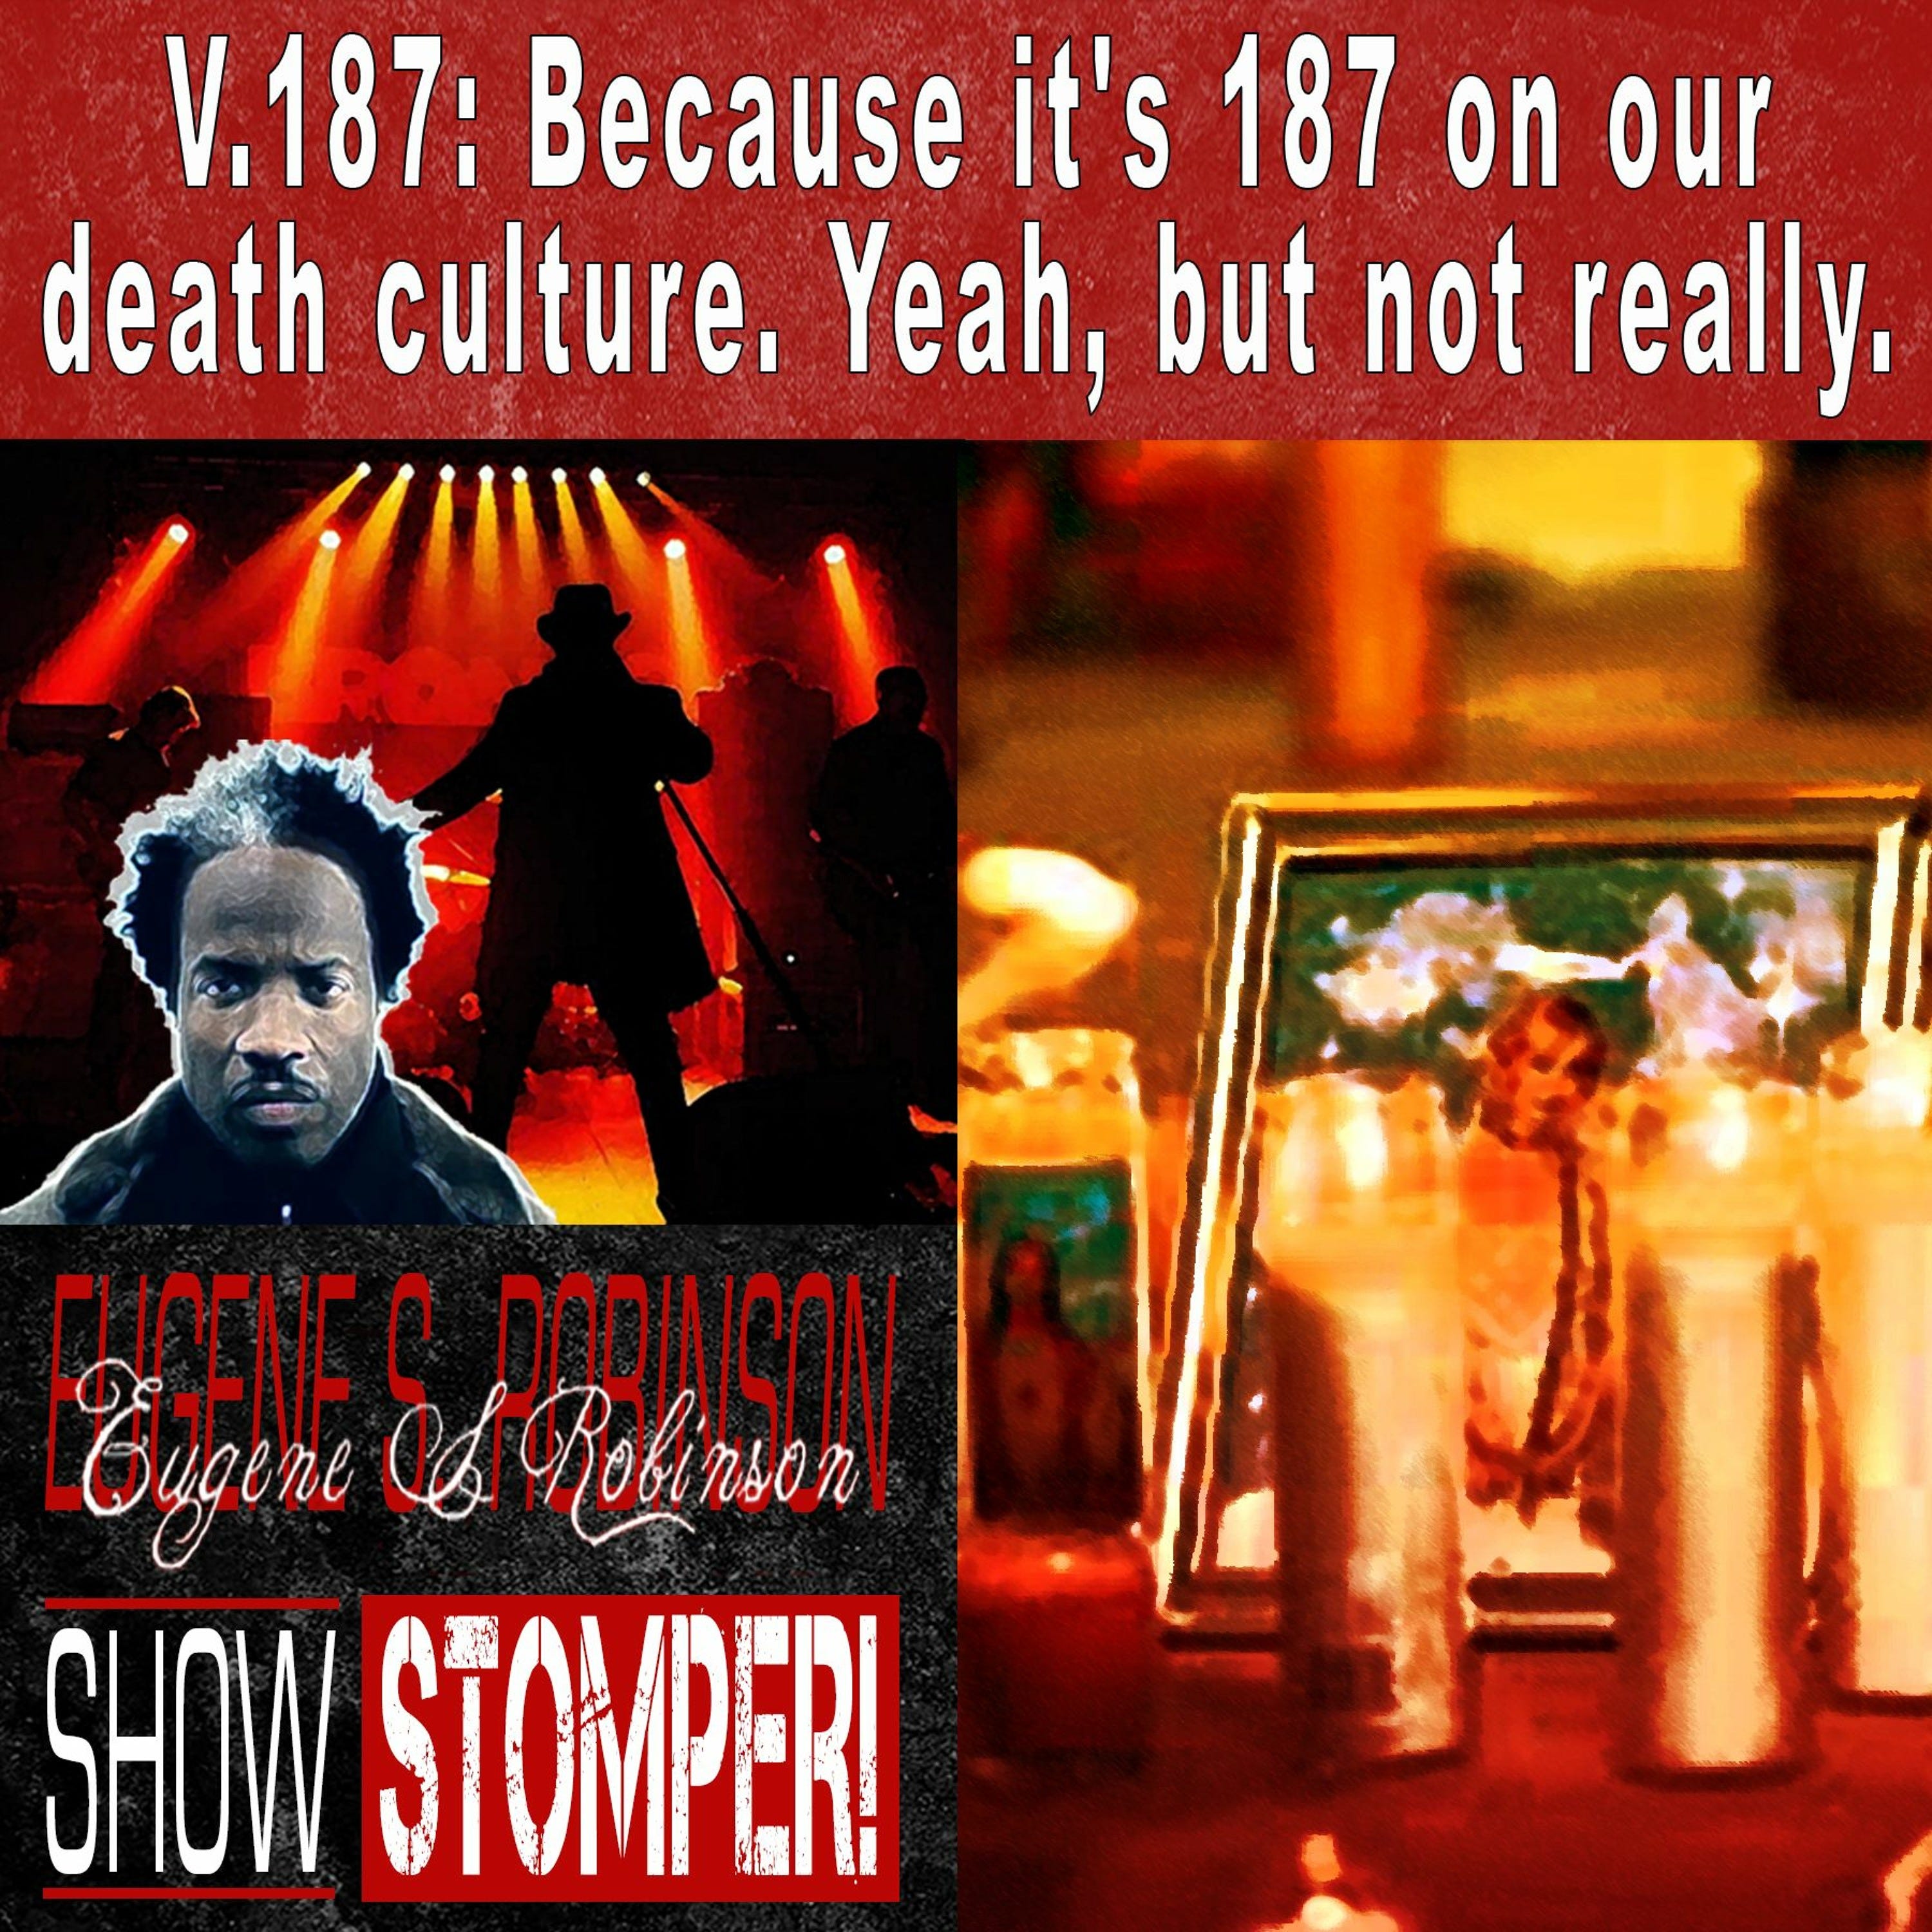 V.187 On Our Death Culture. Yeah, But Not Really. The Eugene S. Robinson Show Stomper!